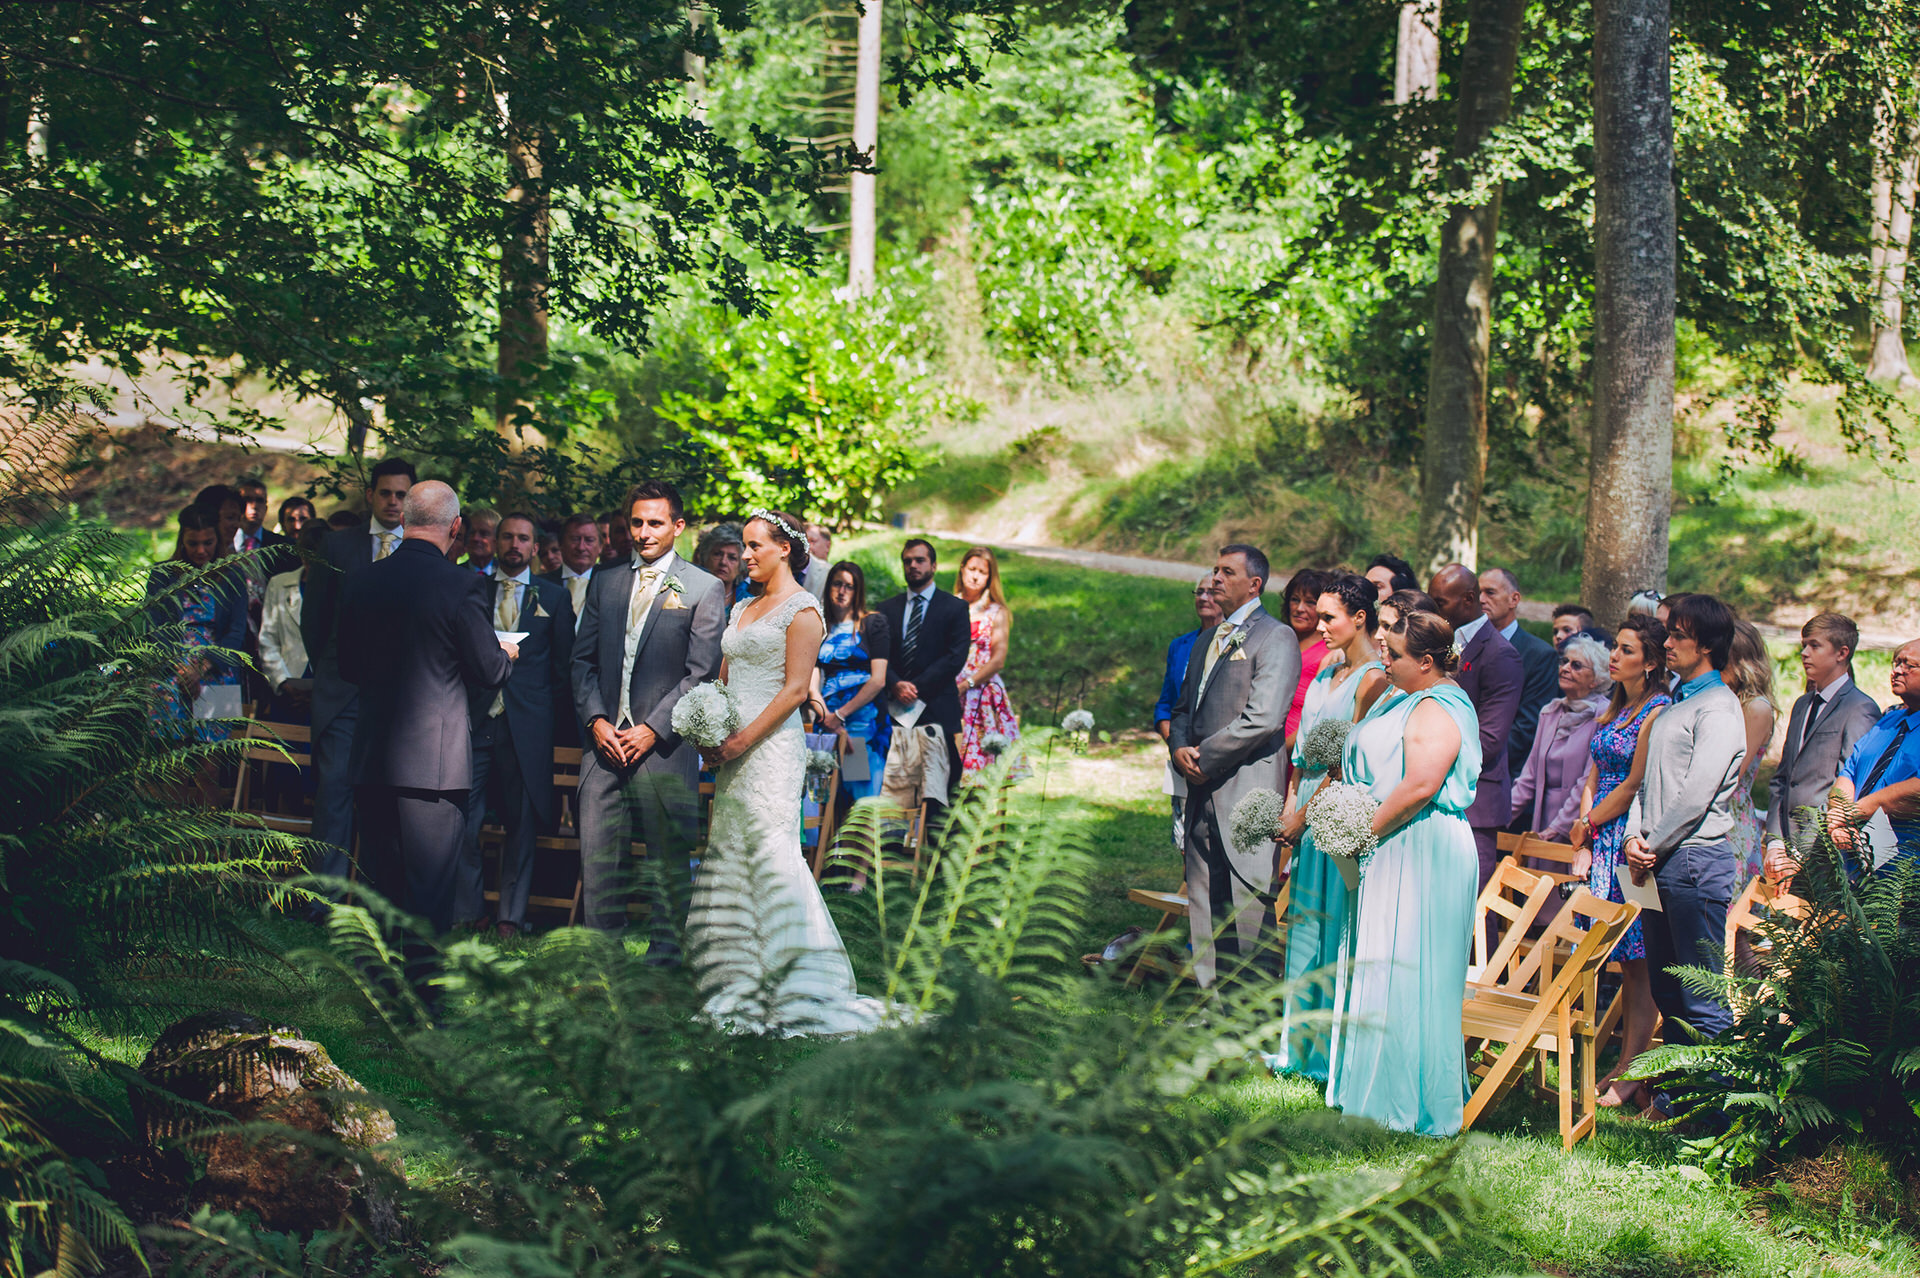 Wedding ceremony by the cascades at hestercombe gardens